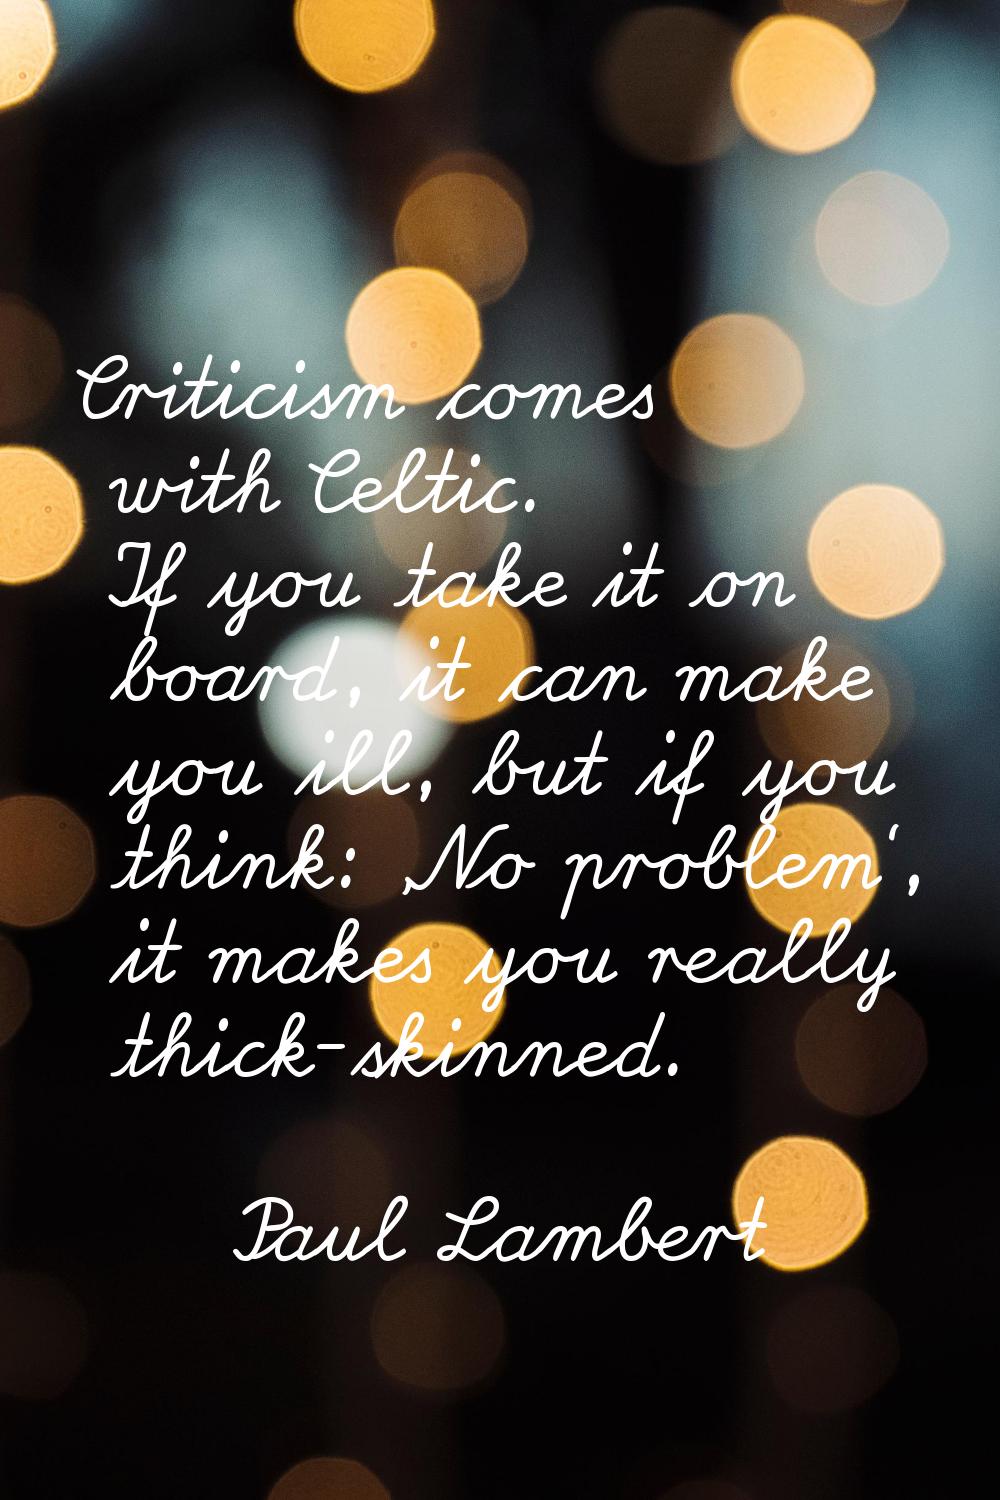 Criticism comes with Celtic. If you take it on board, it can make you ill, but if you think: 'No pr